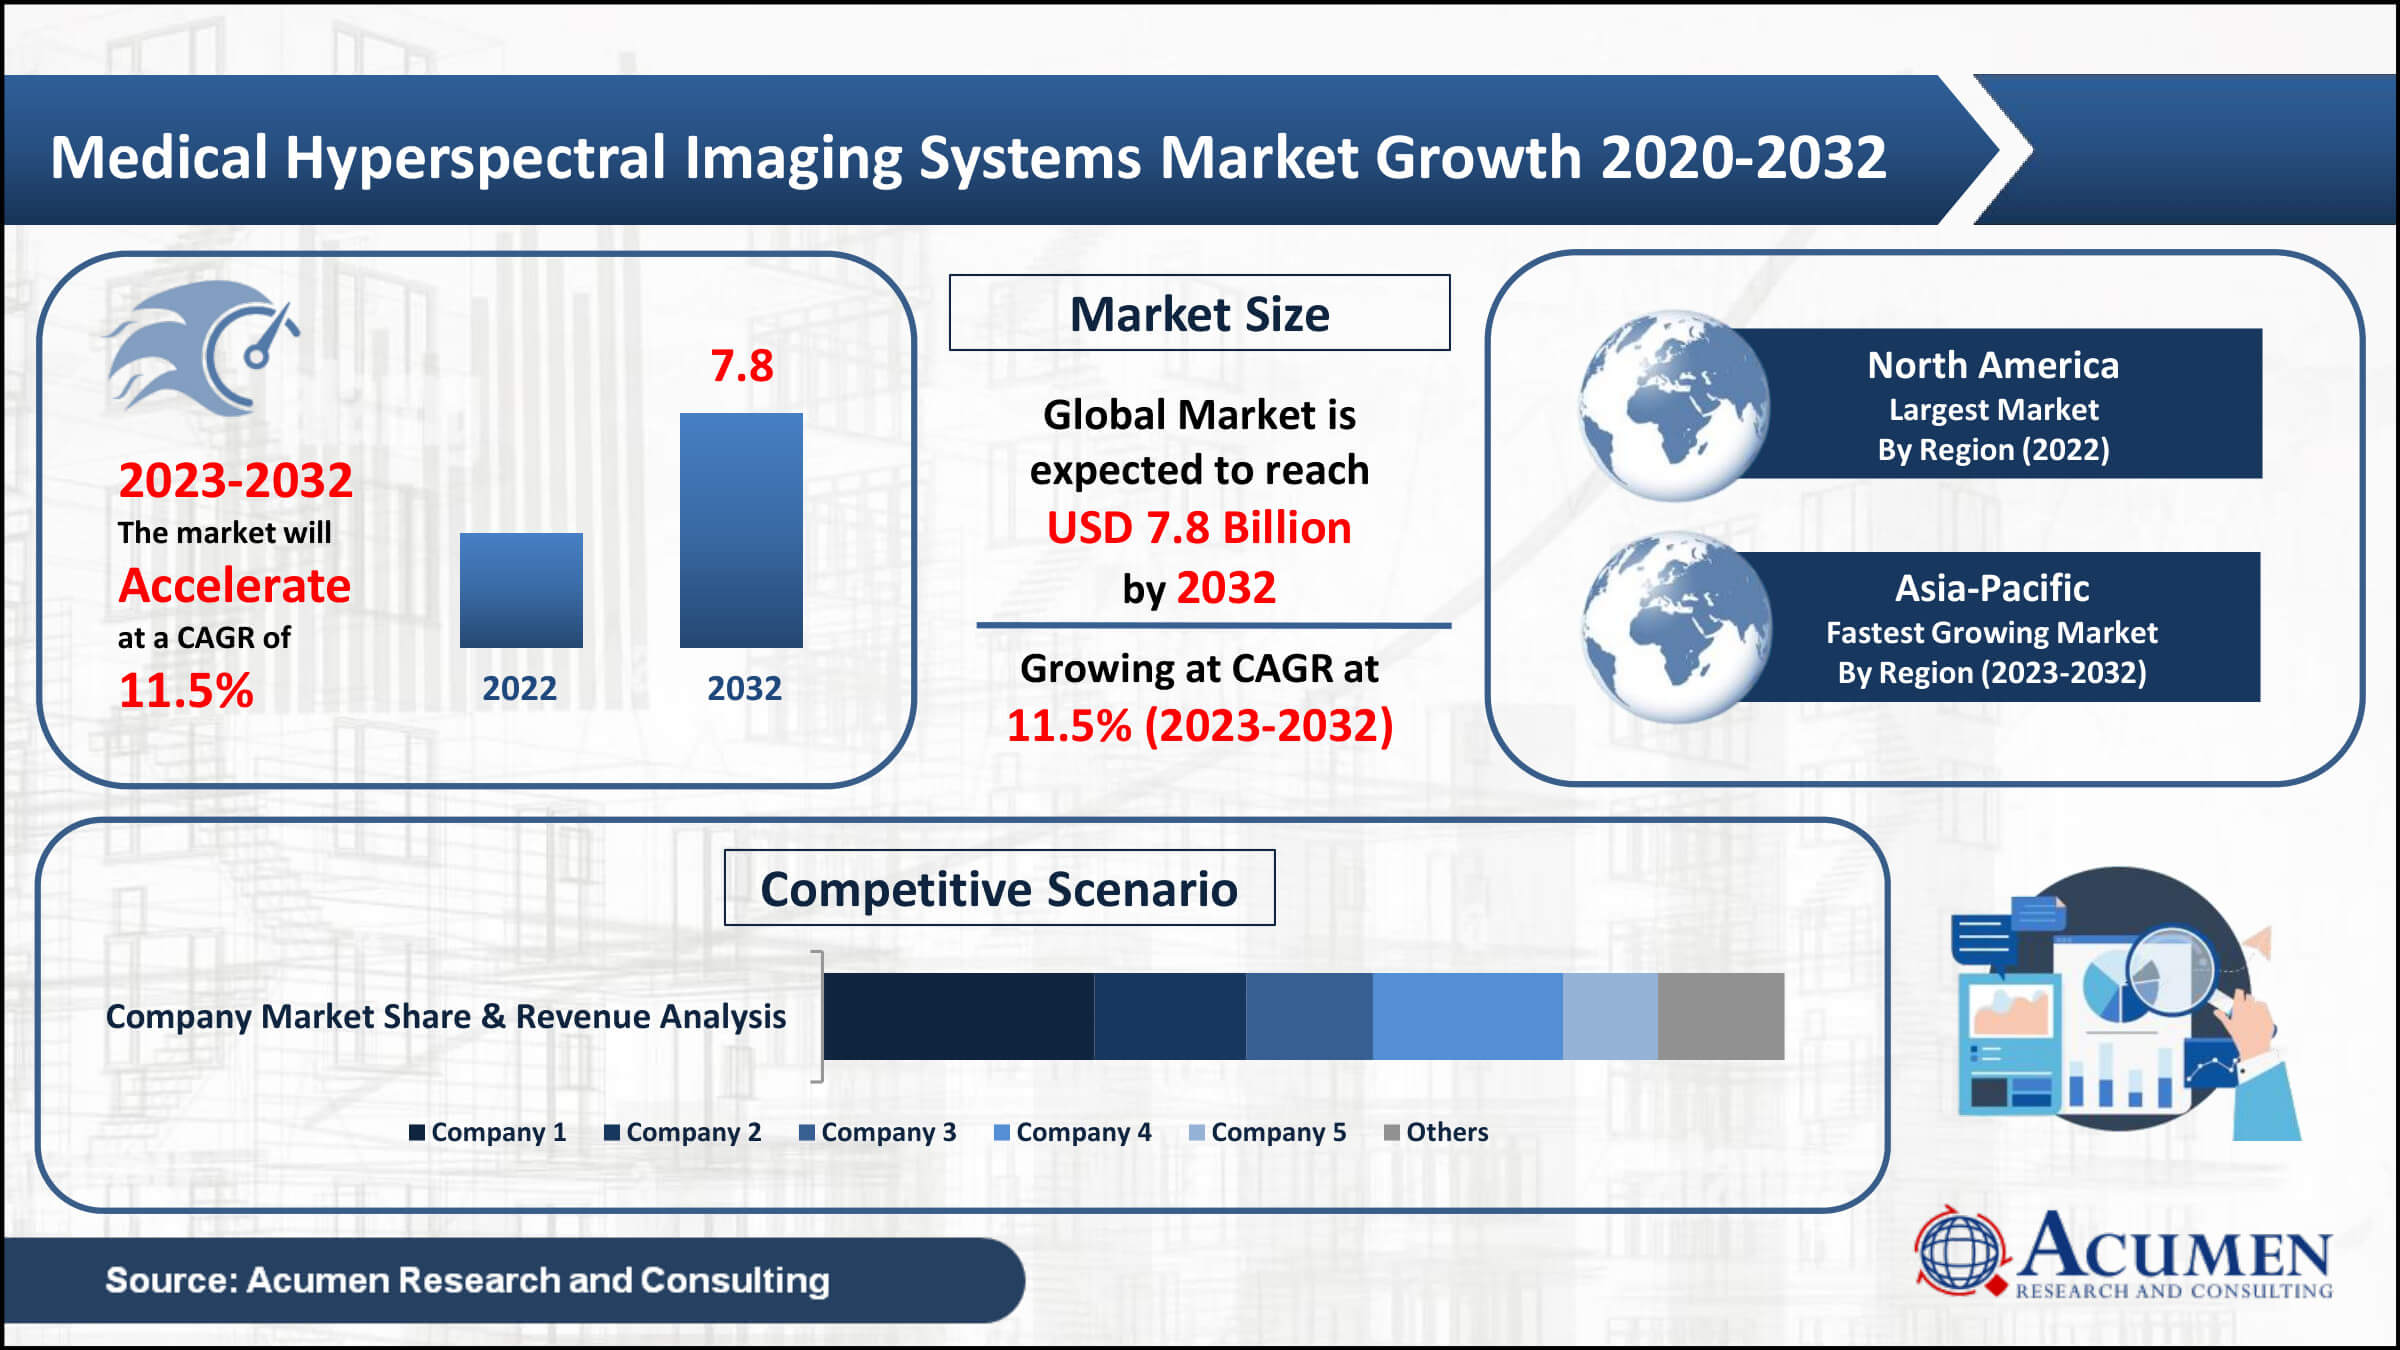 Medical Hyperspectral Imaging Systems Market Analysis